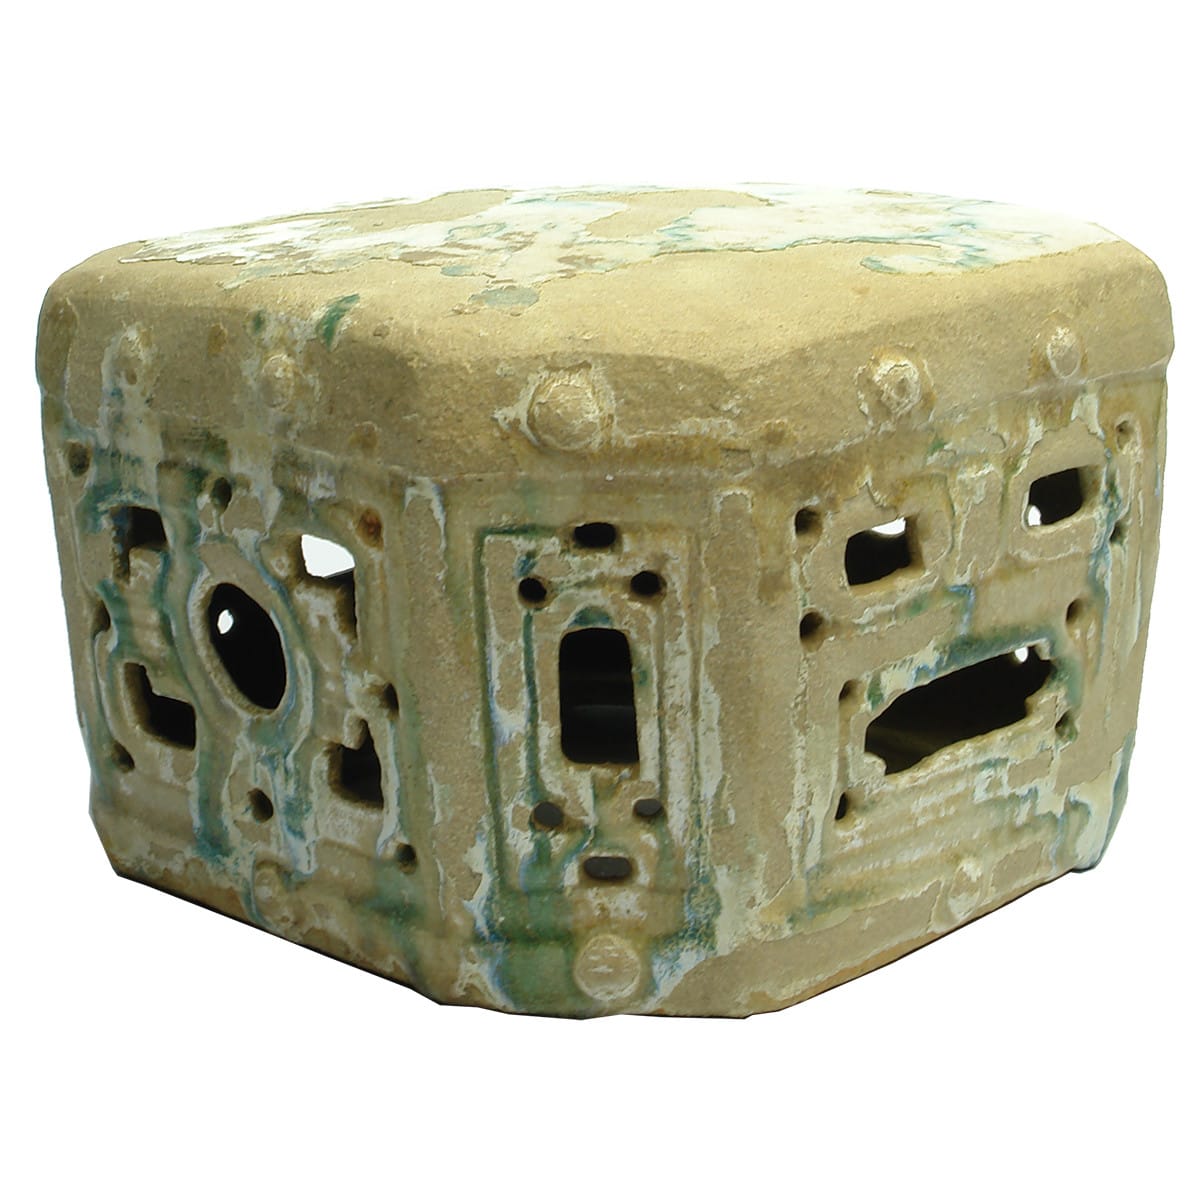 Ornamental Chinese Pottery Item. The top of something. Green, Yellow, White glazes.